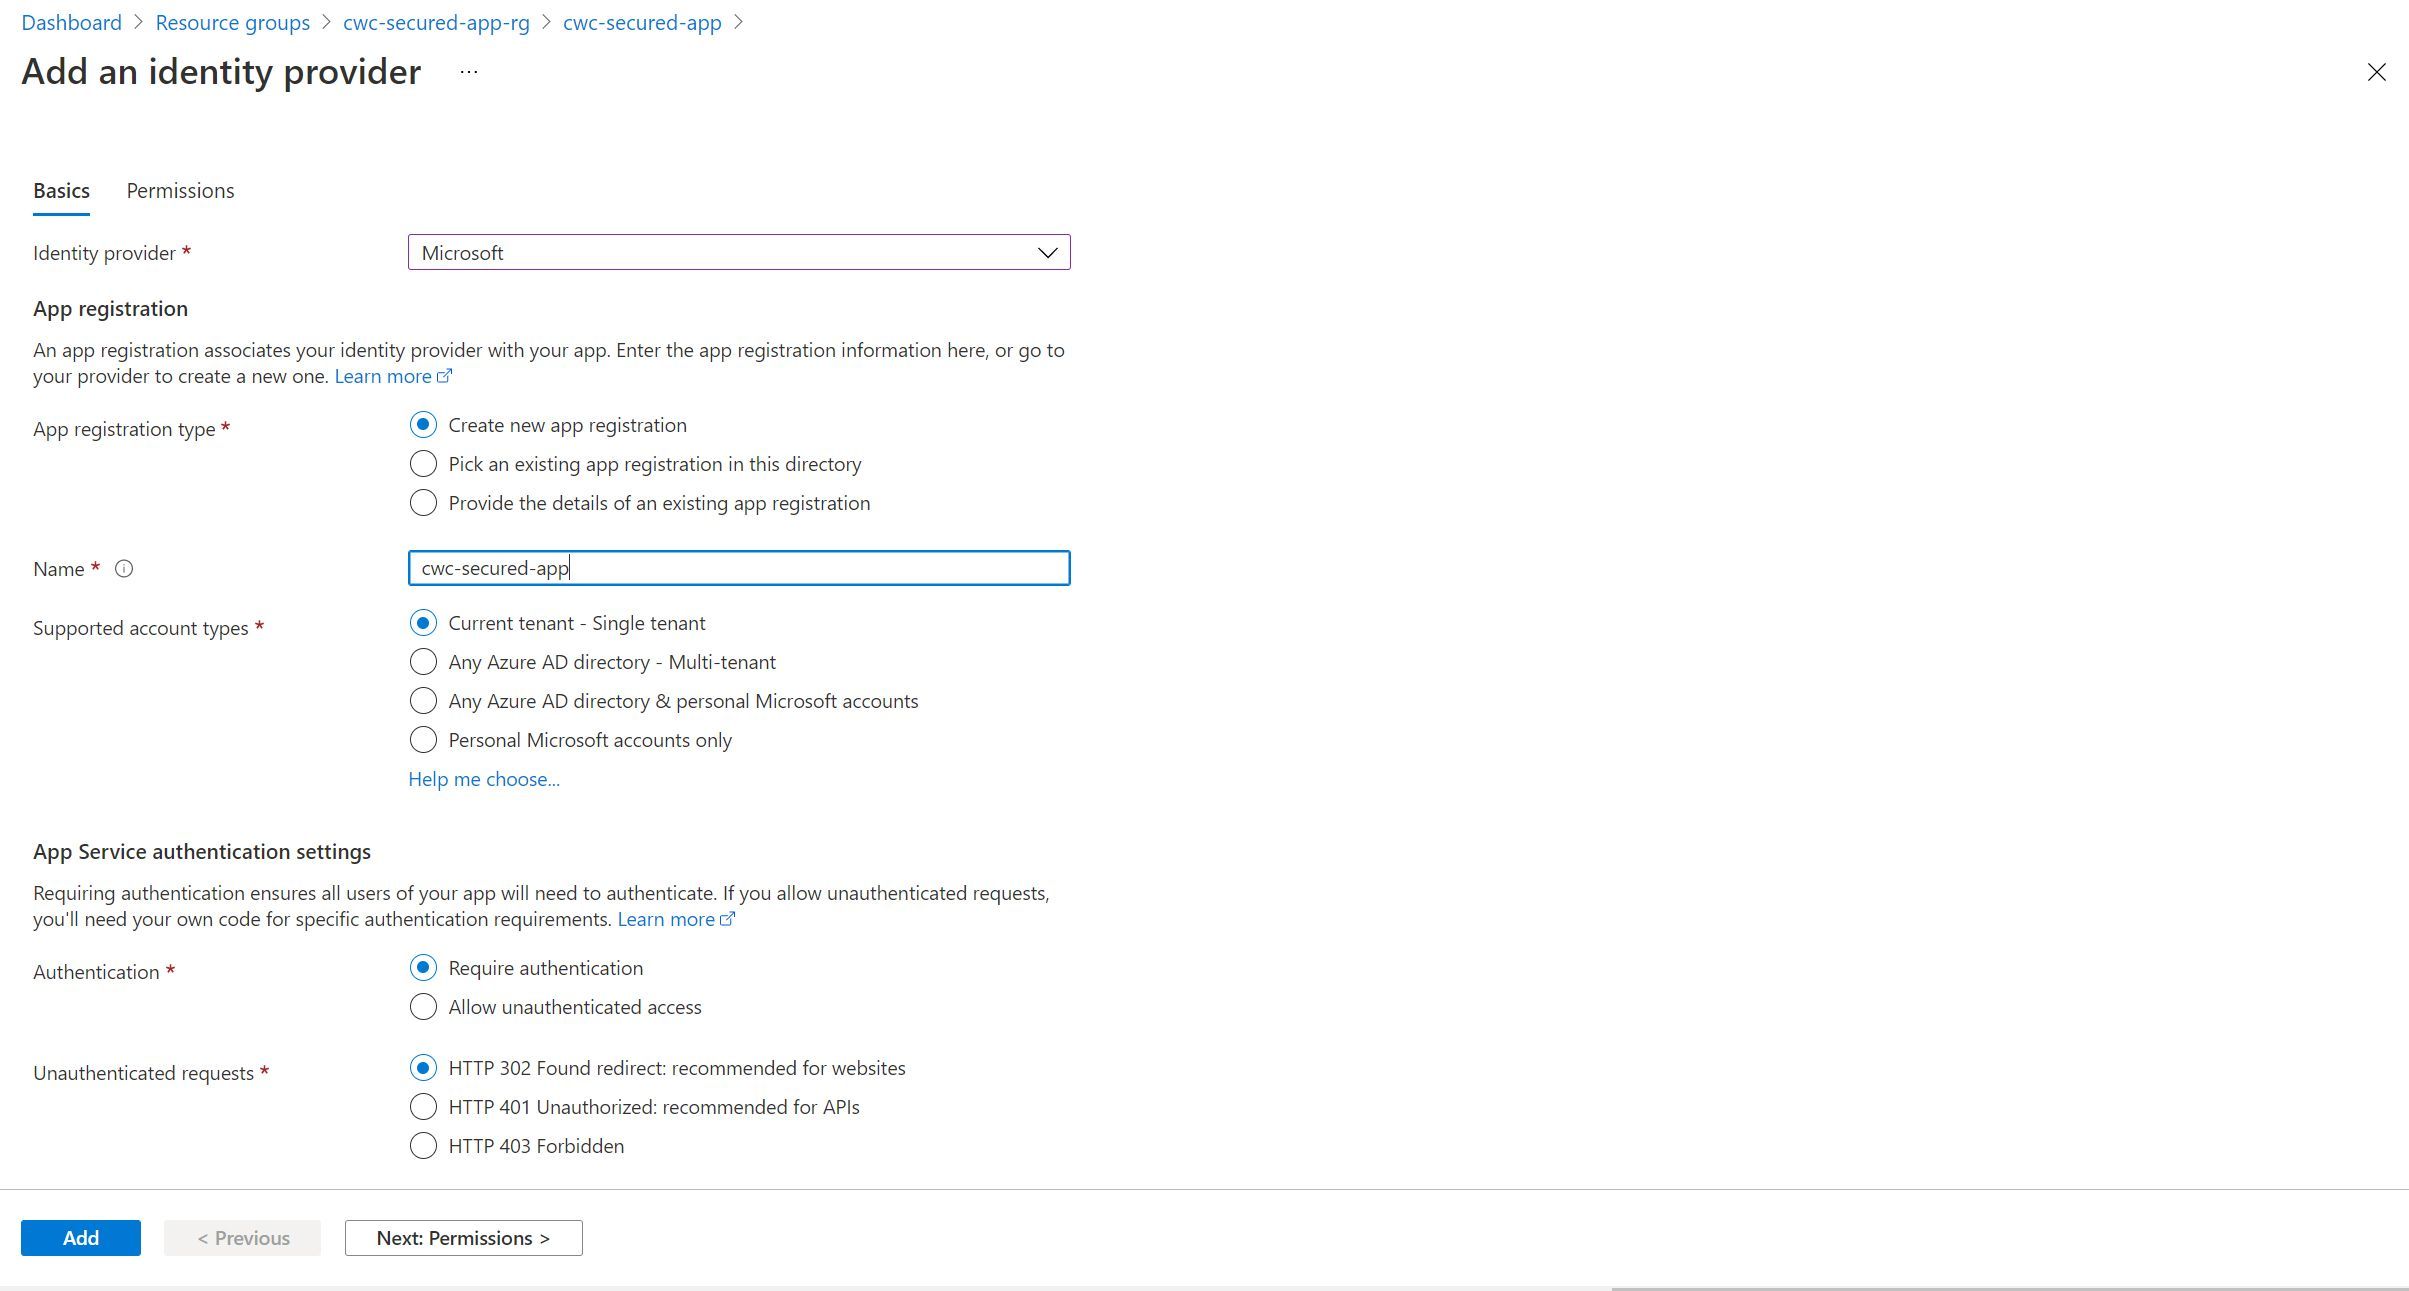 Screenshot showing the App Easy Auth configuration settings that I used, as explained above